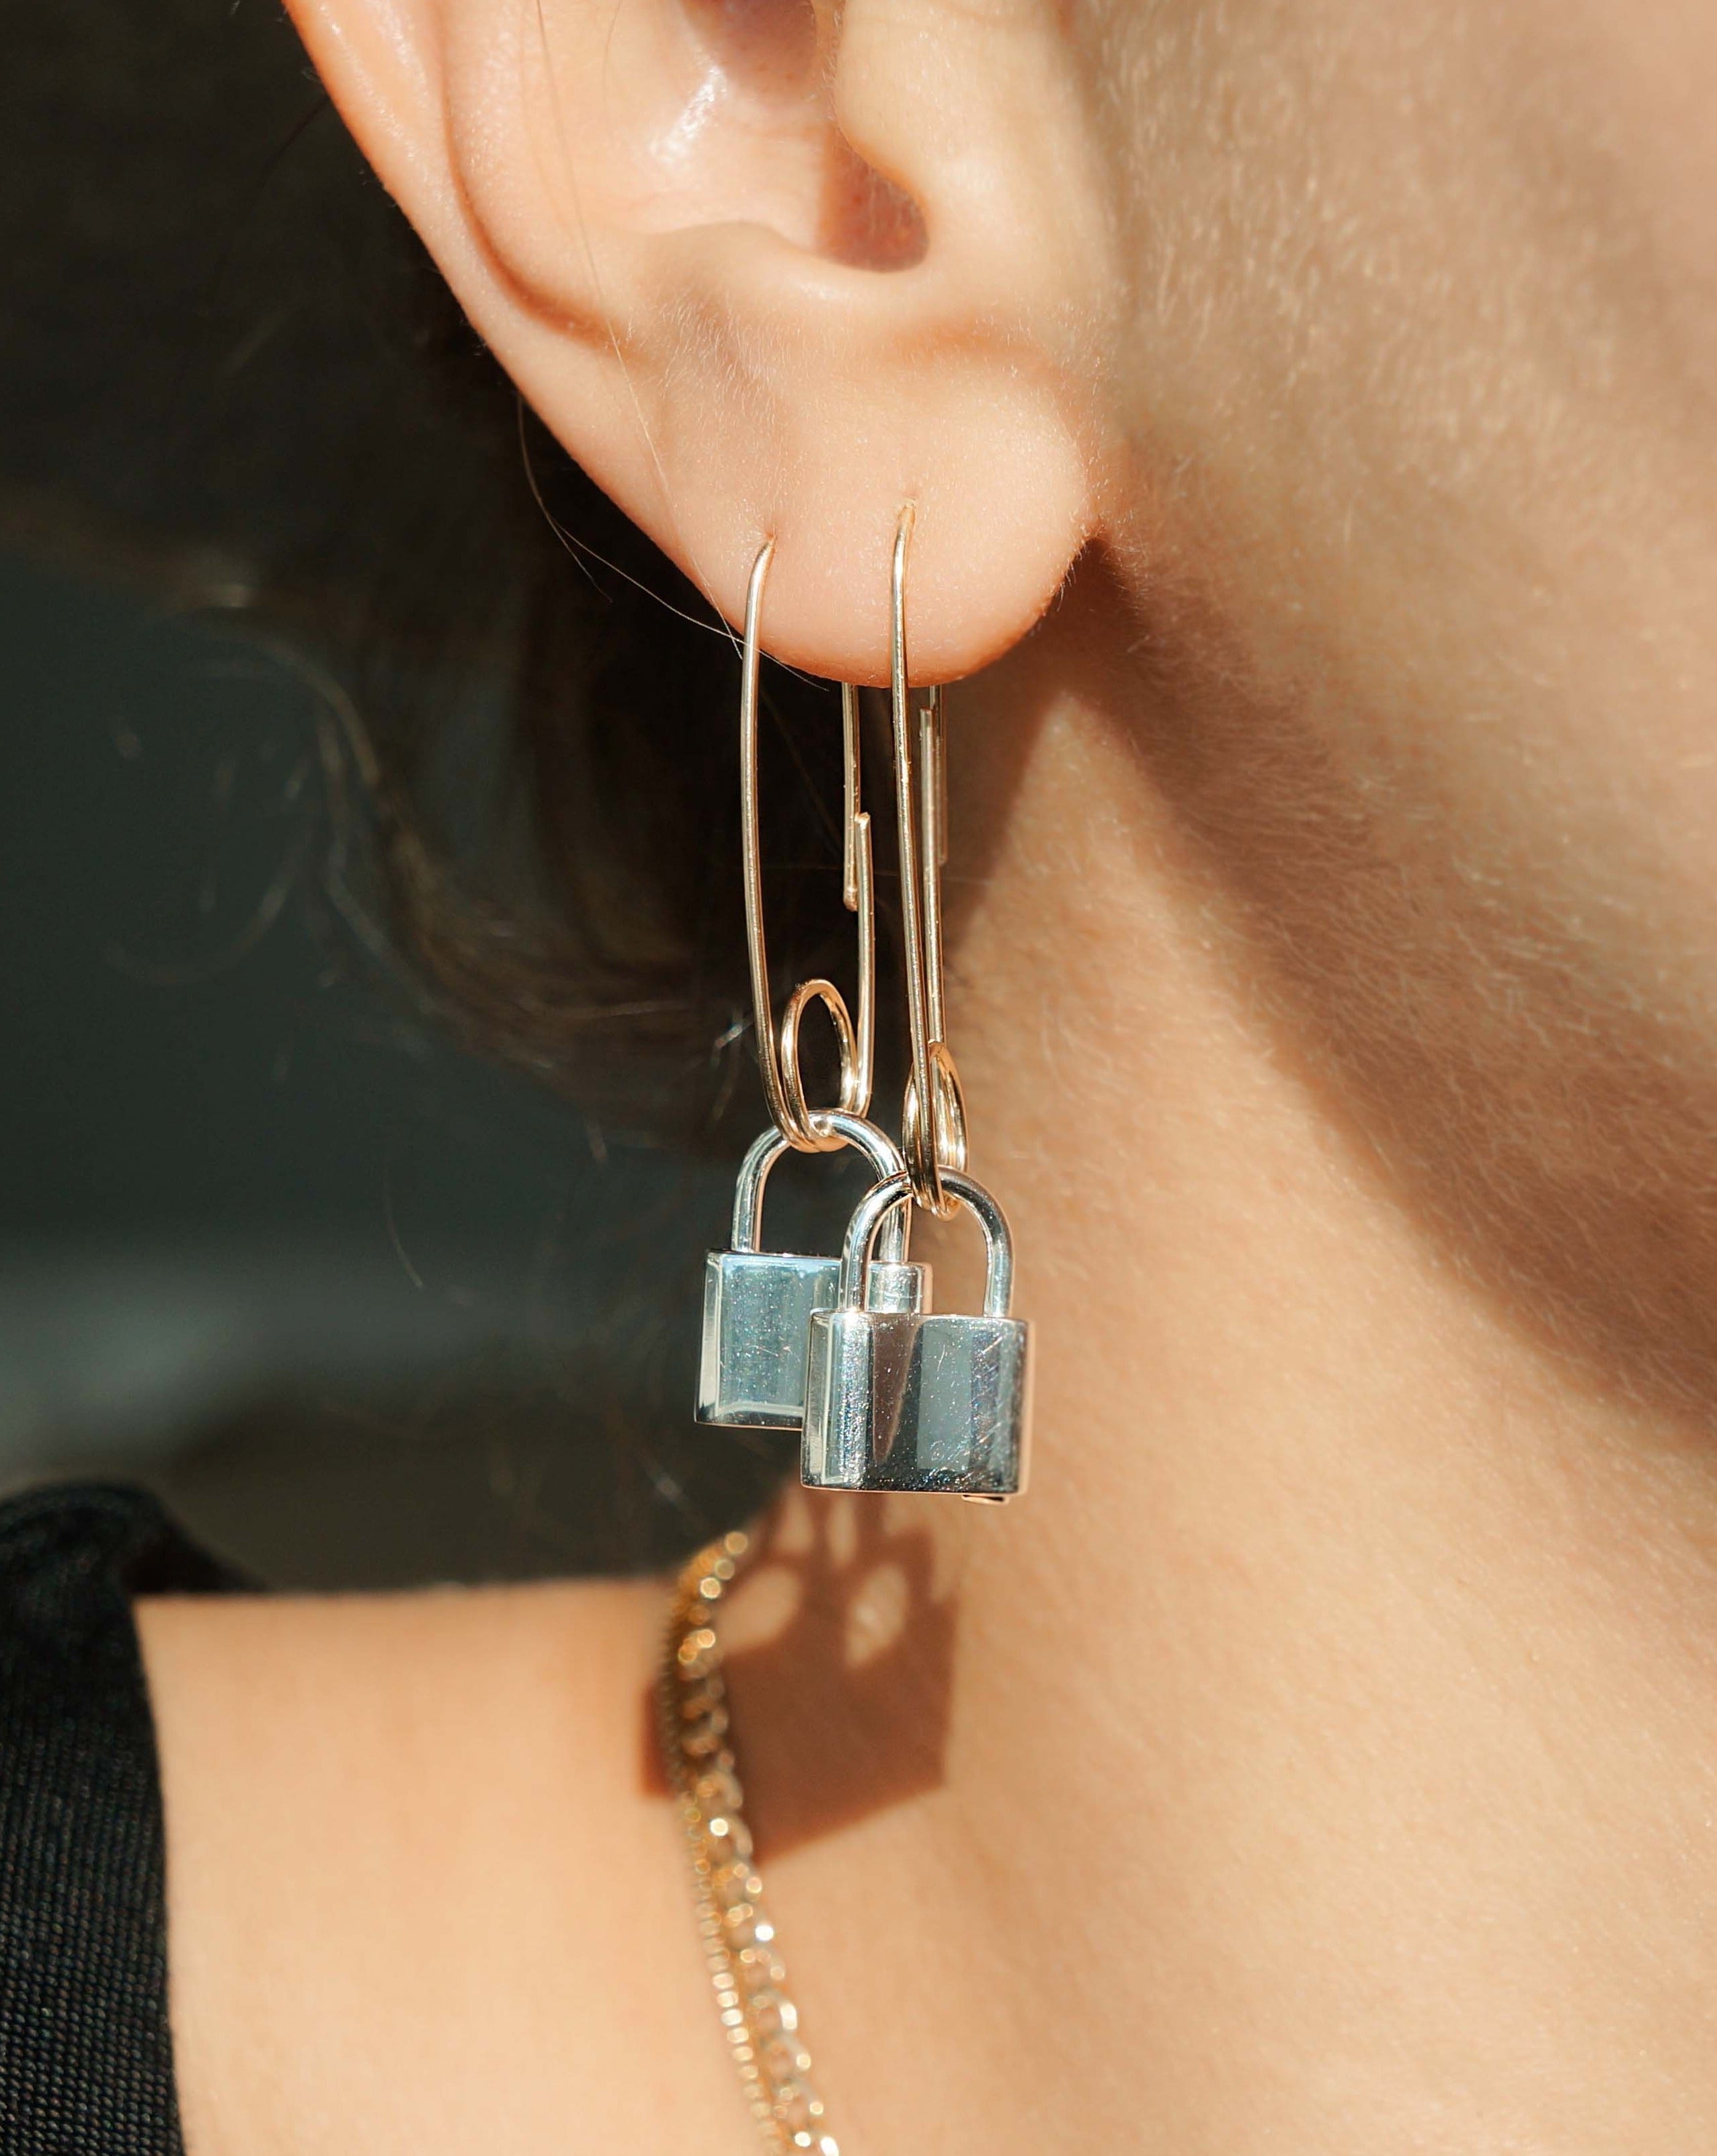 Clip Lock Earring Large by KOZAKH. A single paper clip style earring in 14K Gold Filled, featuring a silver lock.